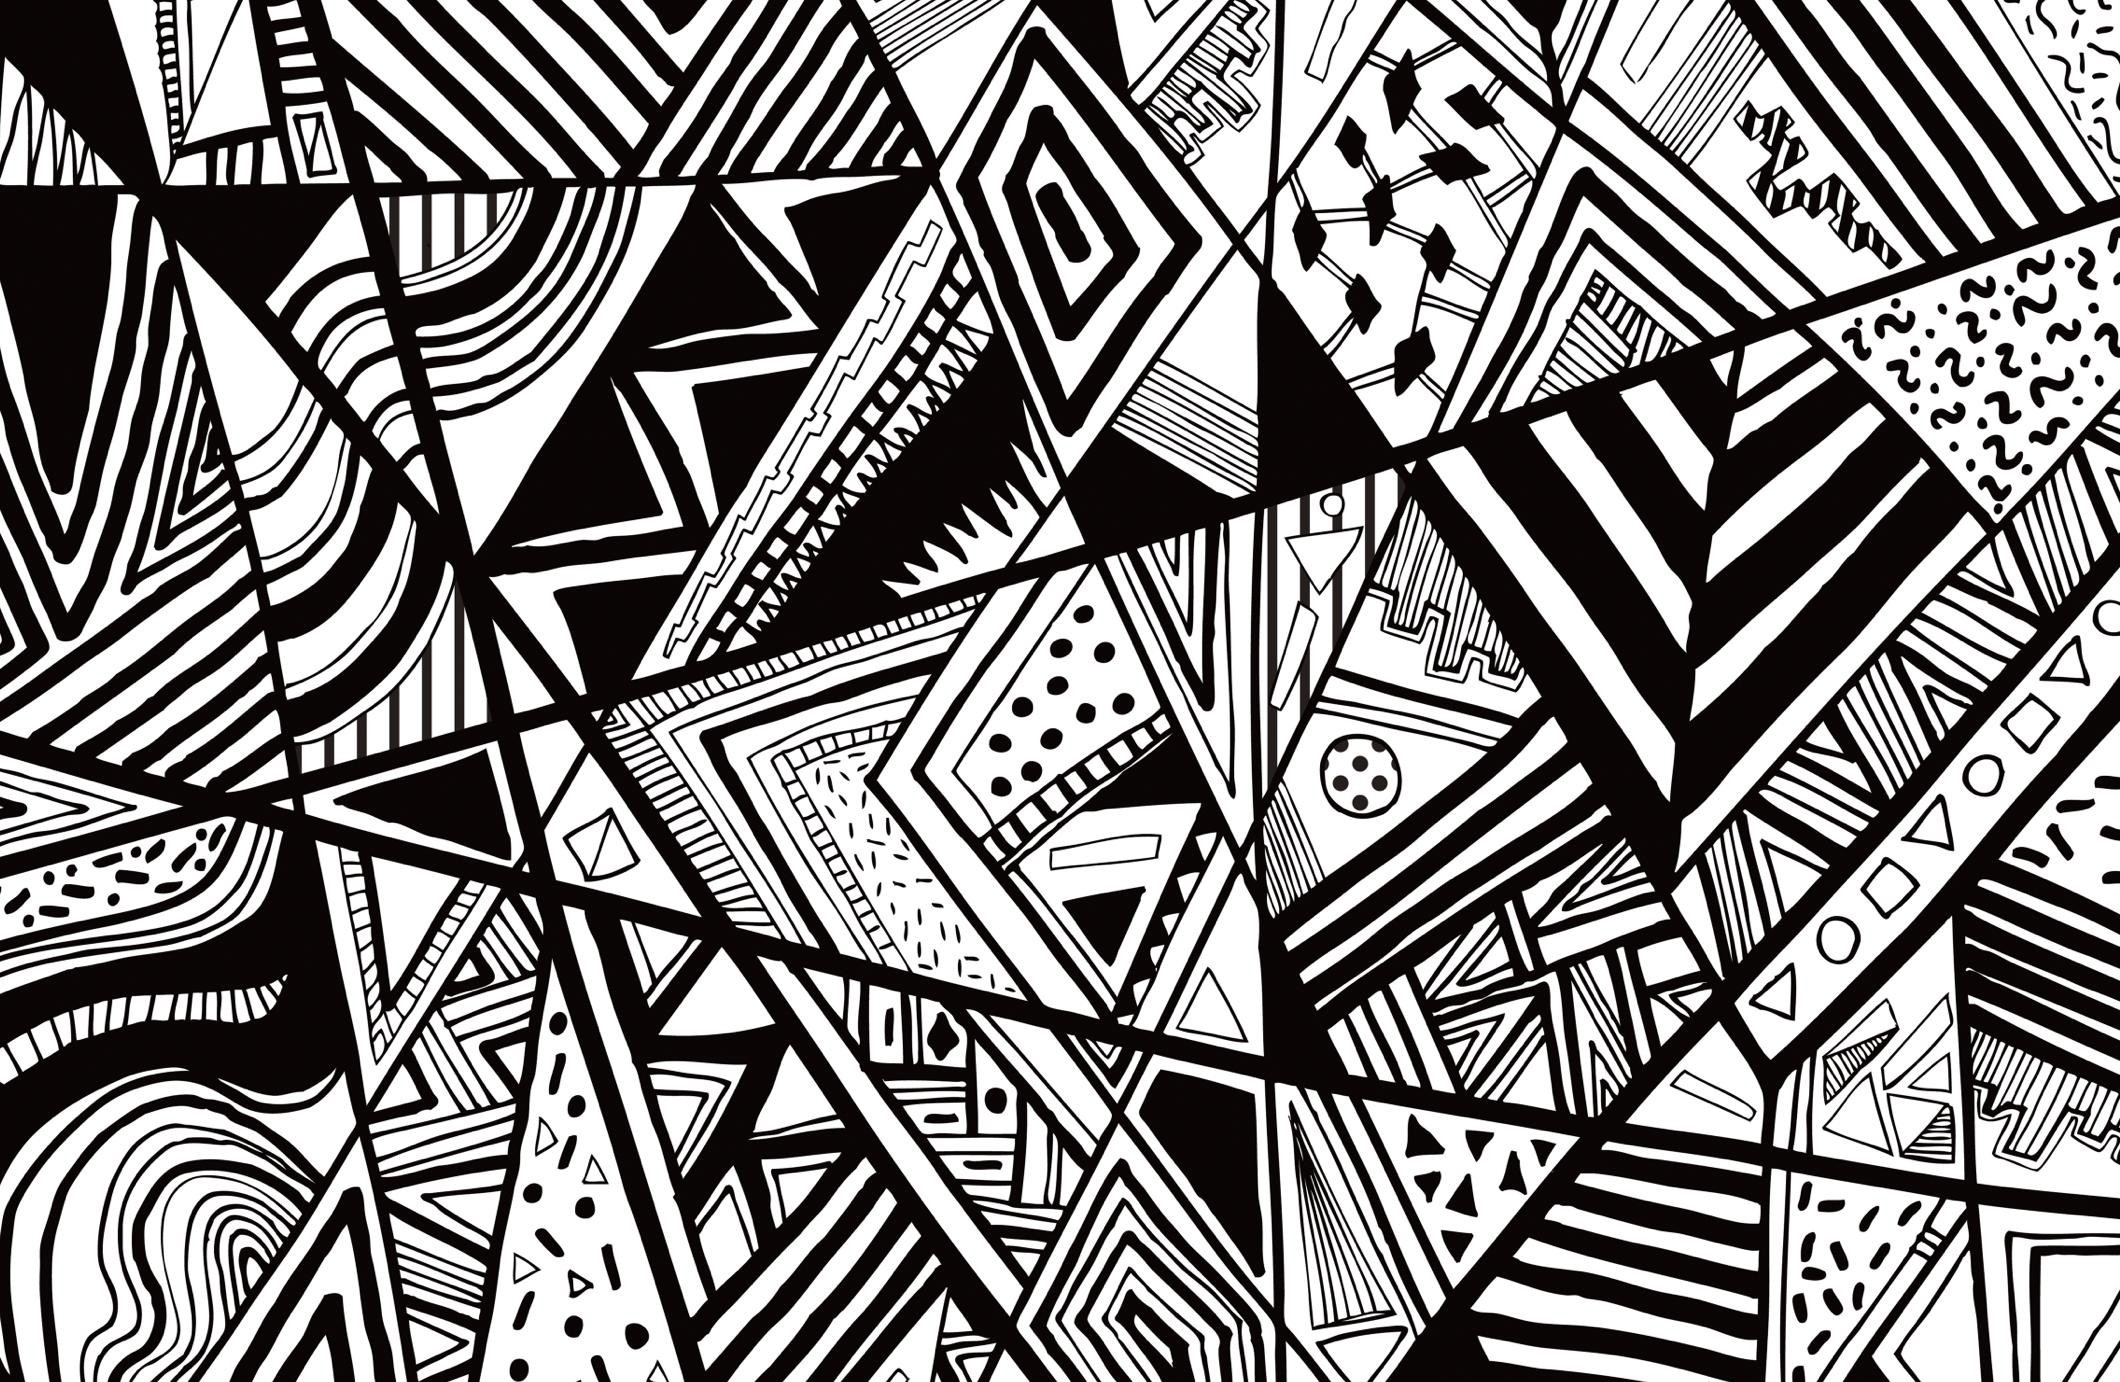 2120x1382 10 Top Wallpaper Black And White Abstract FULL HD 1920Ã1080 For PC  Background